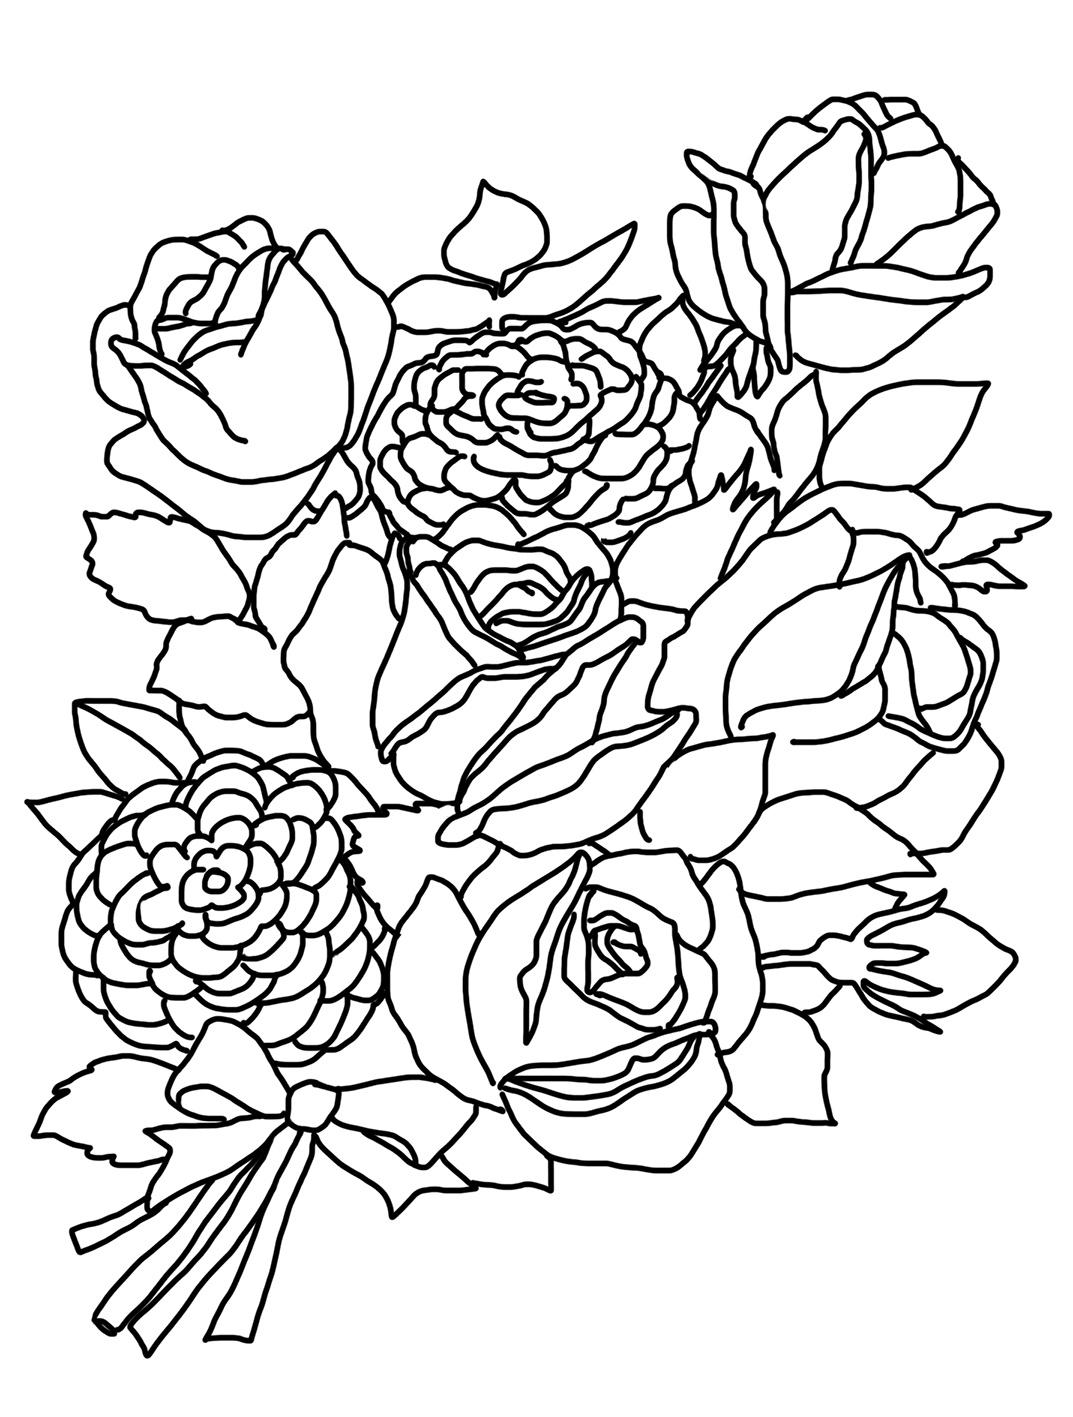 flower coloring page flower coloring pages page coloring flower 